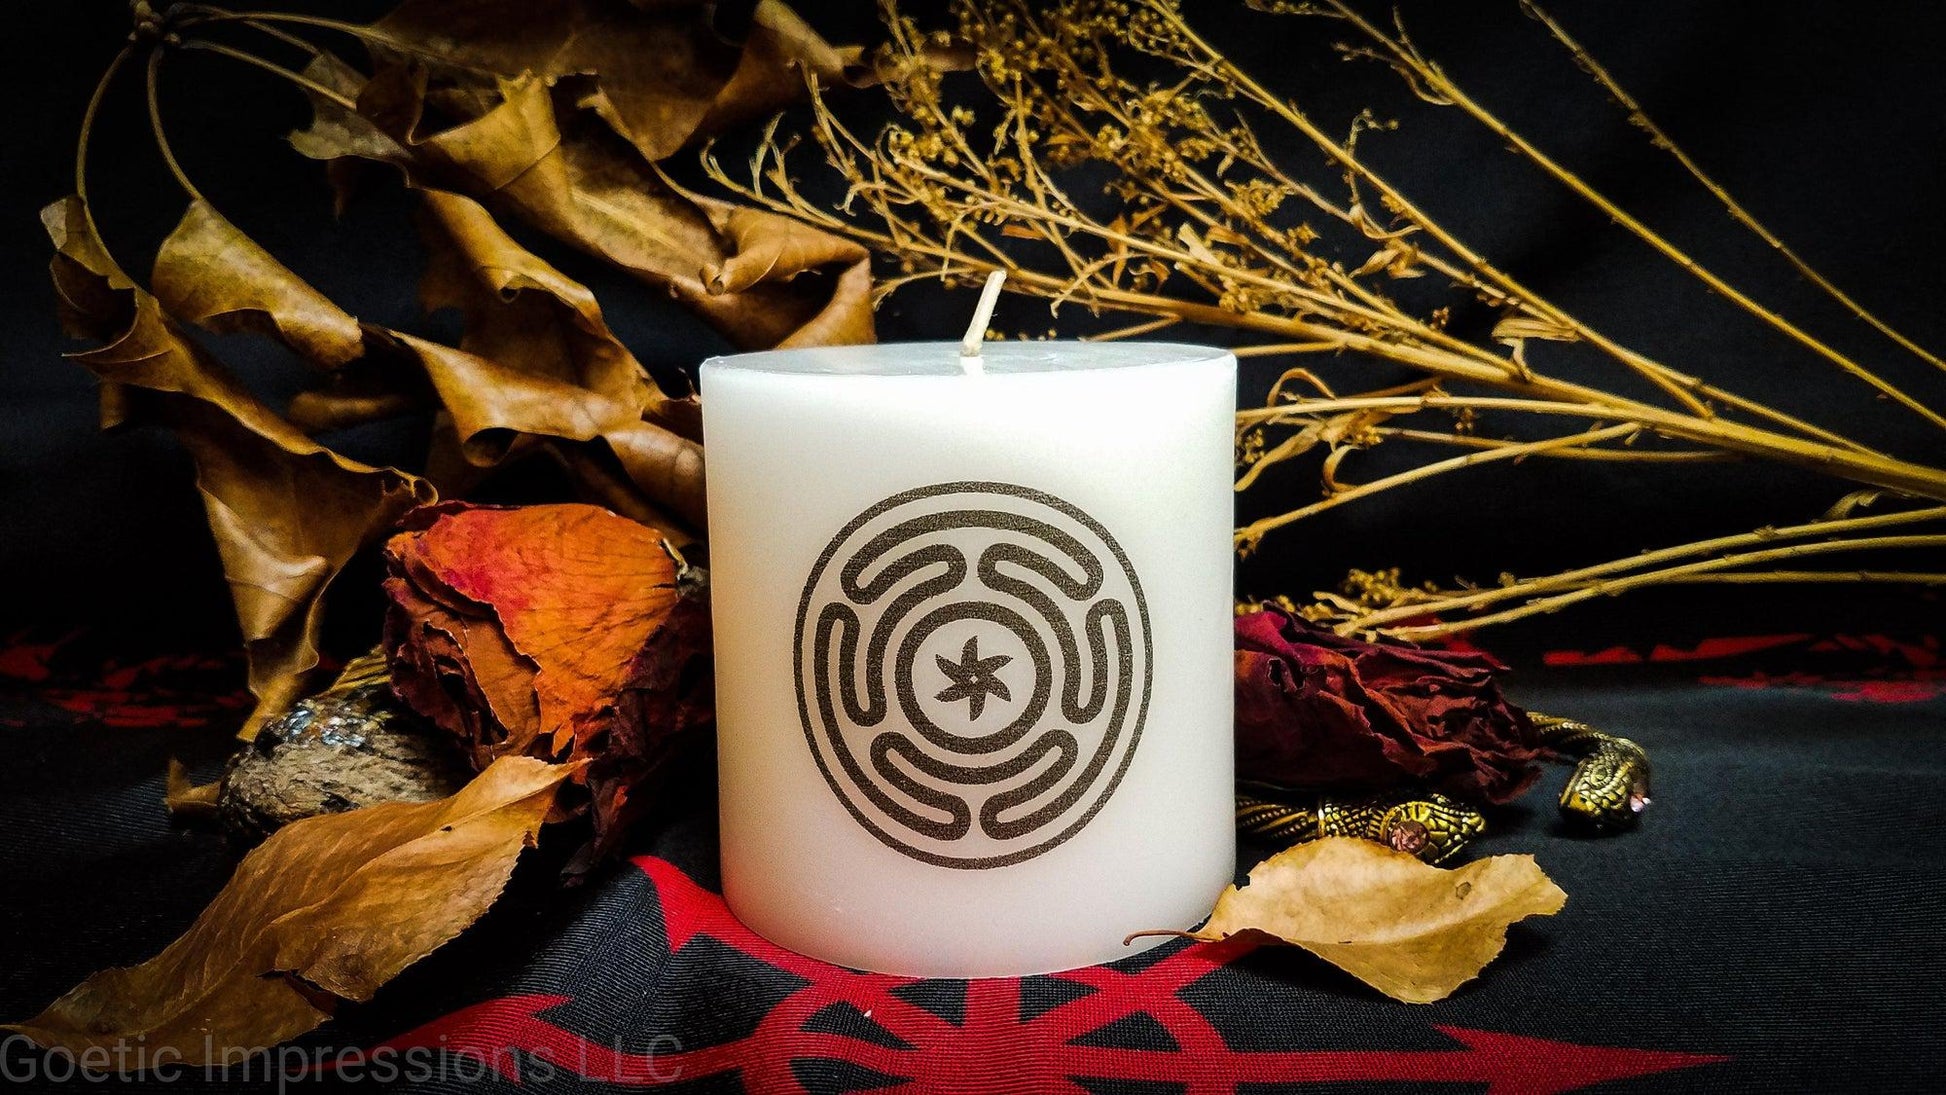 A while candle with a black imprinted design of the Stropholos or Wheel of Hecate